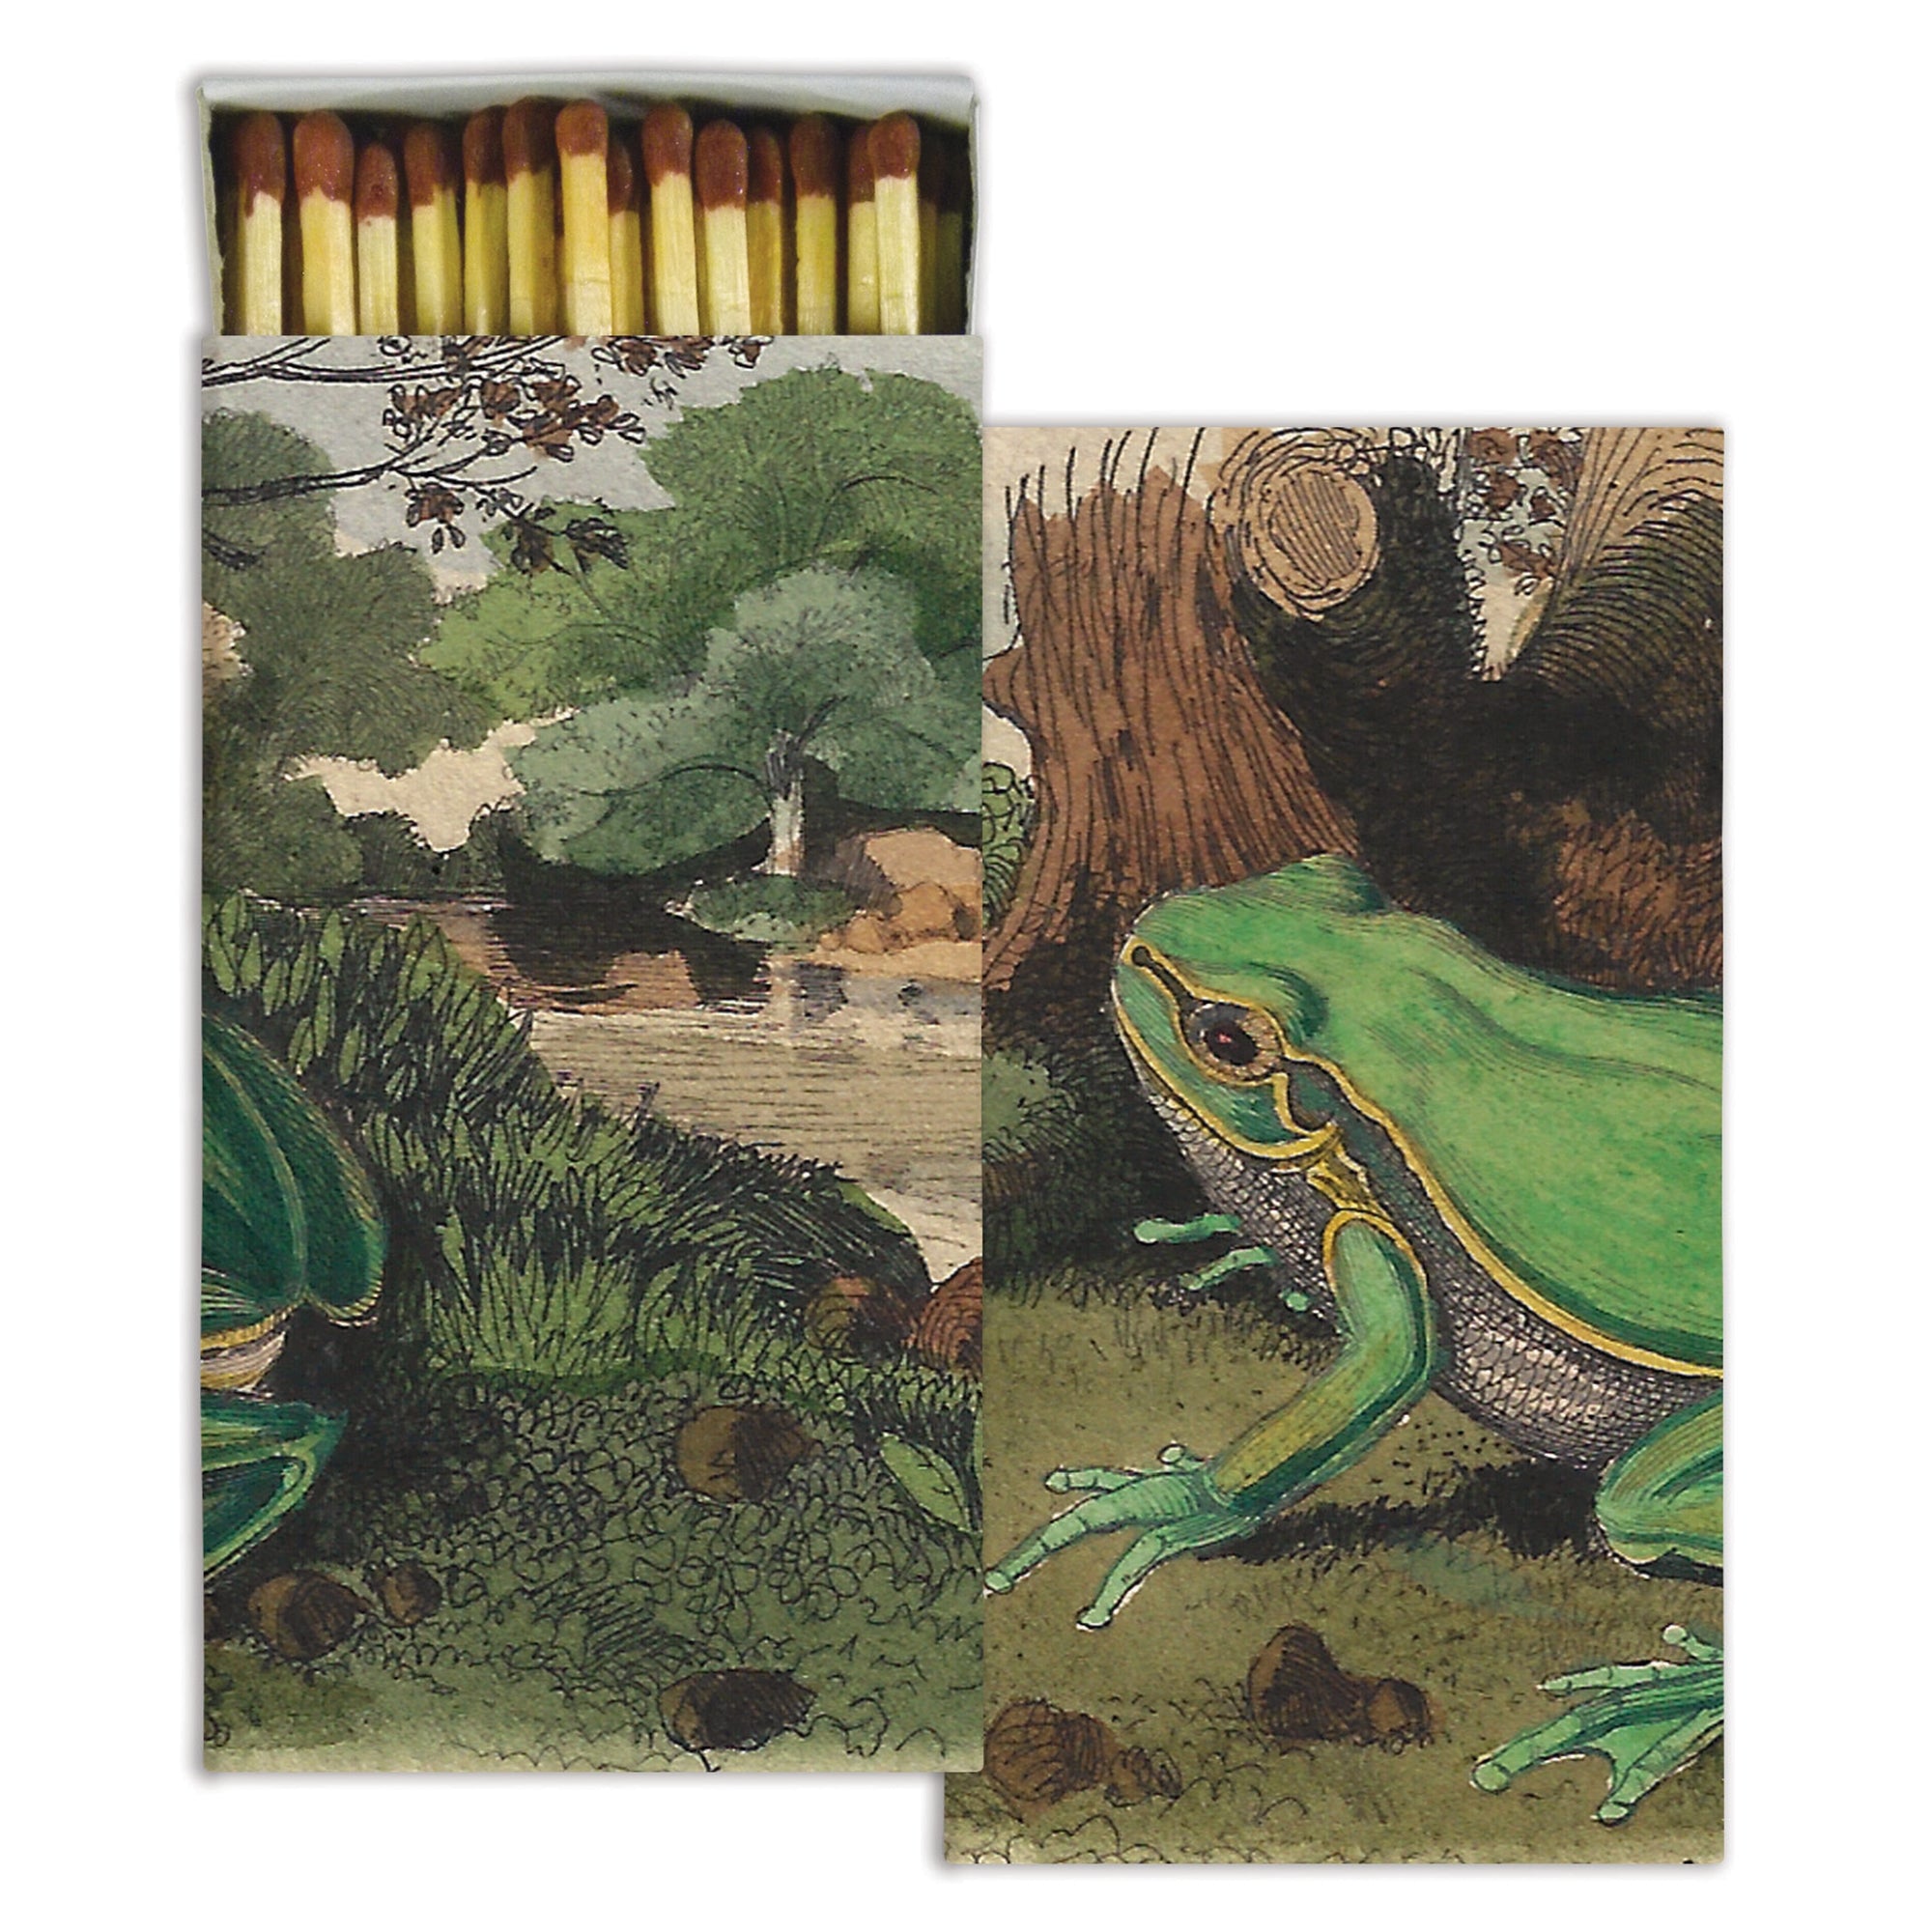 Landscape with Frog Matches